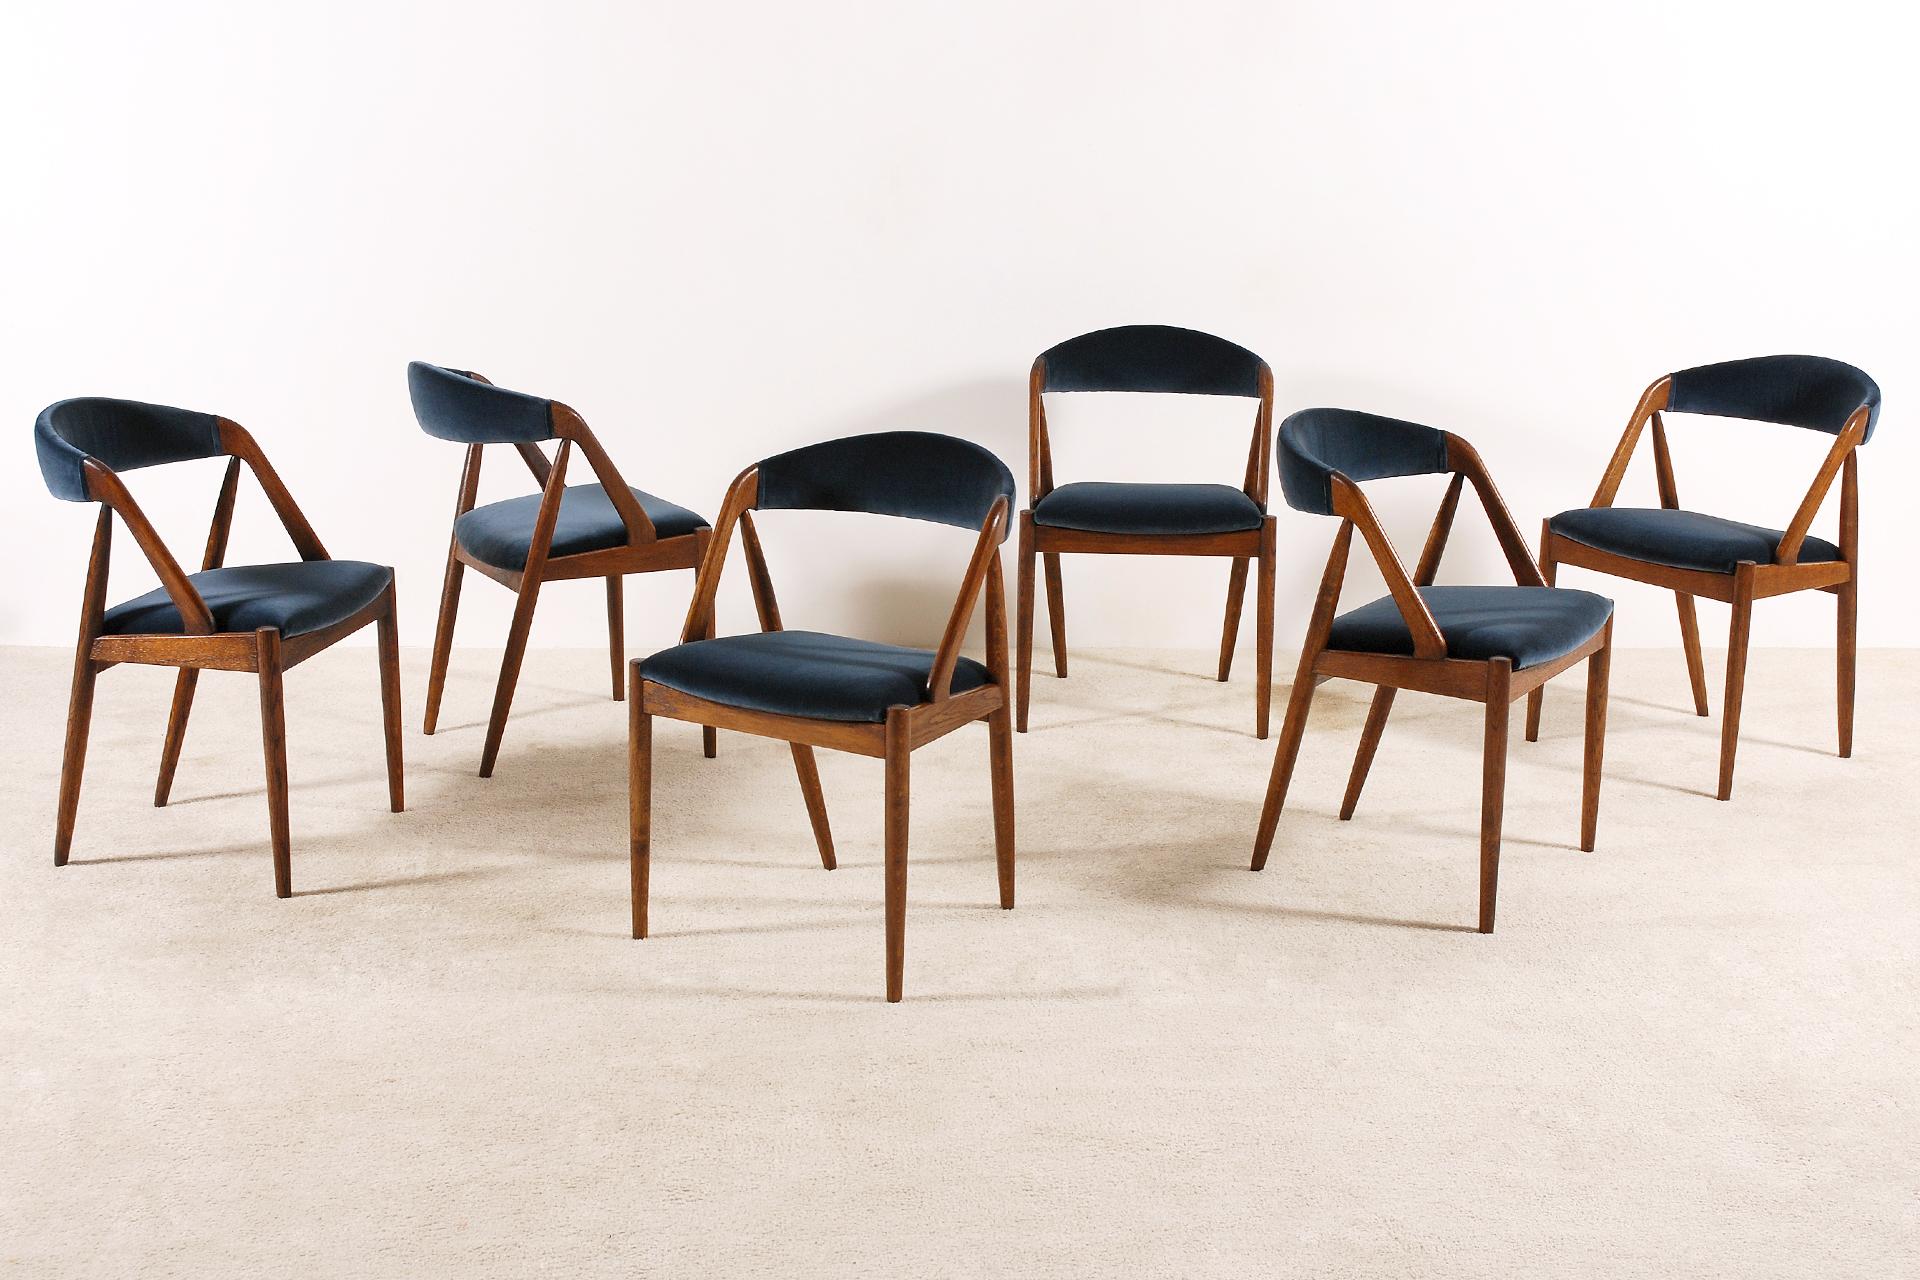 Rare set of 6 dining chairs designed by Kai Kristiansen in the 1960s.
Model 31 manufactured by Schou Andersen Møbelfabrik.
Stained Oak frame and newly reupholstered with high quality dark blue velvet from the Kvadrat Raf Simons